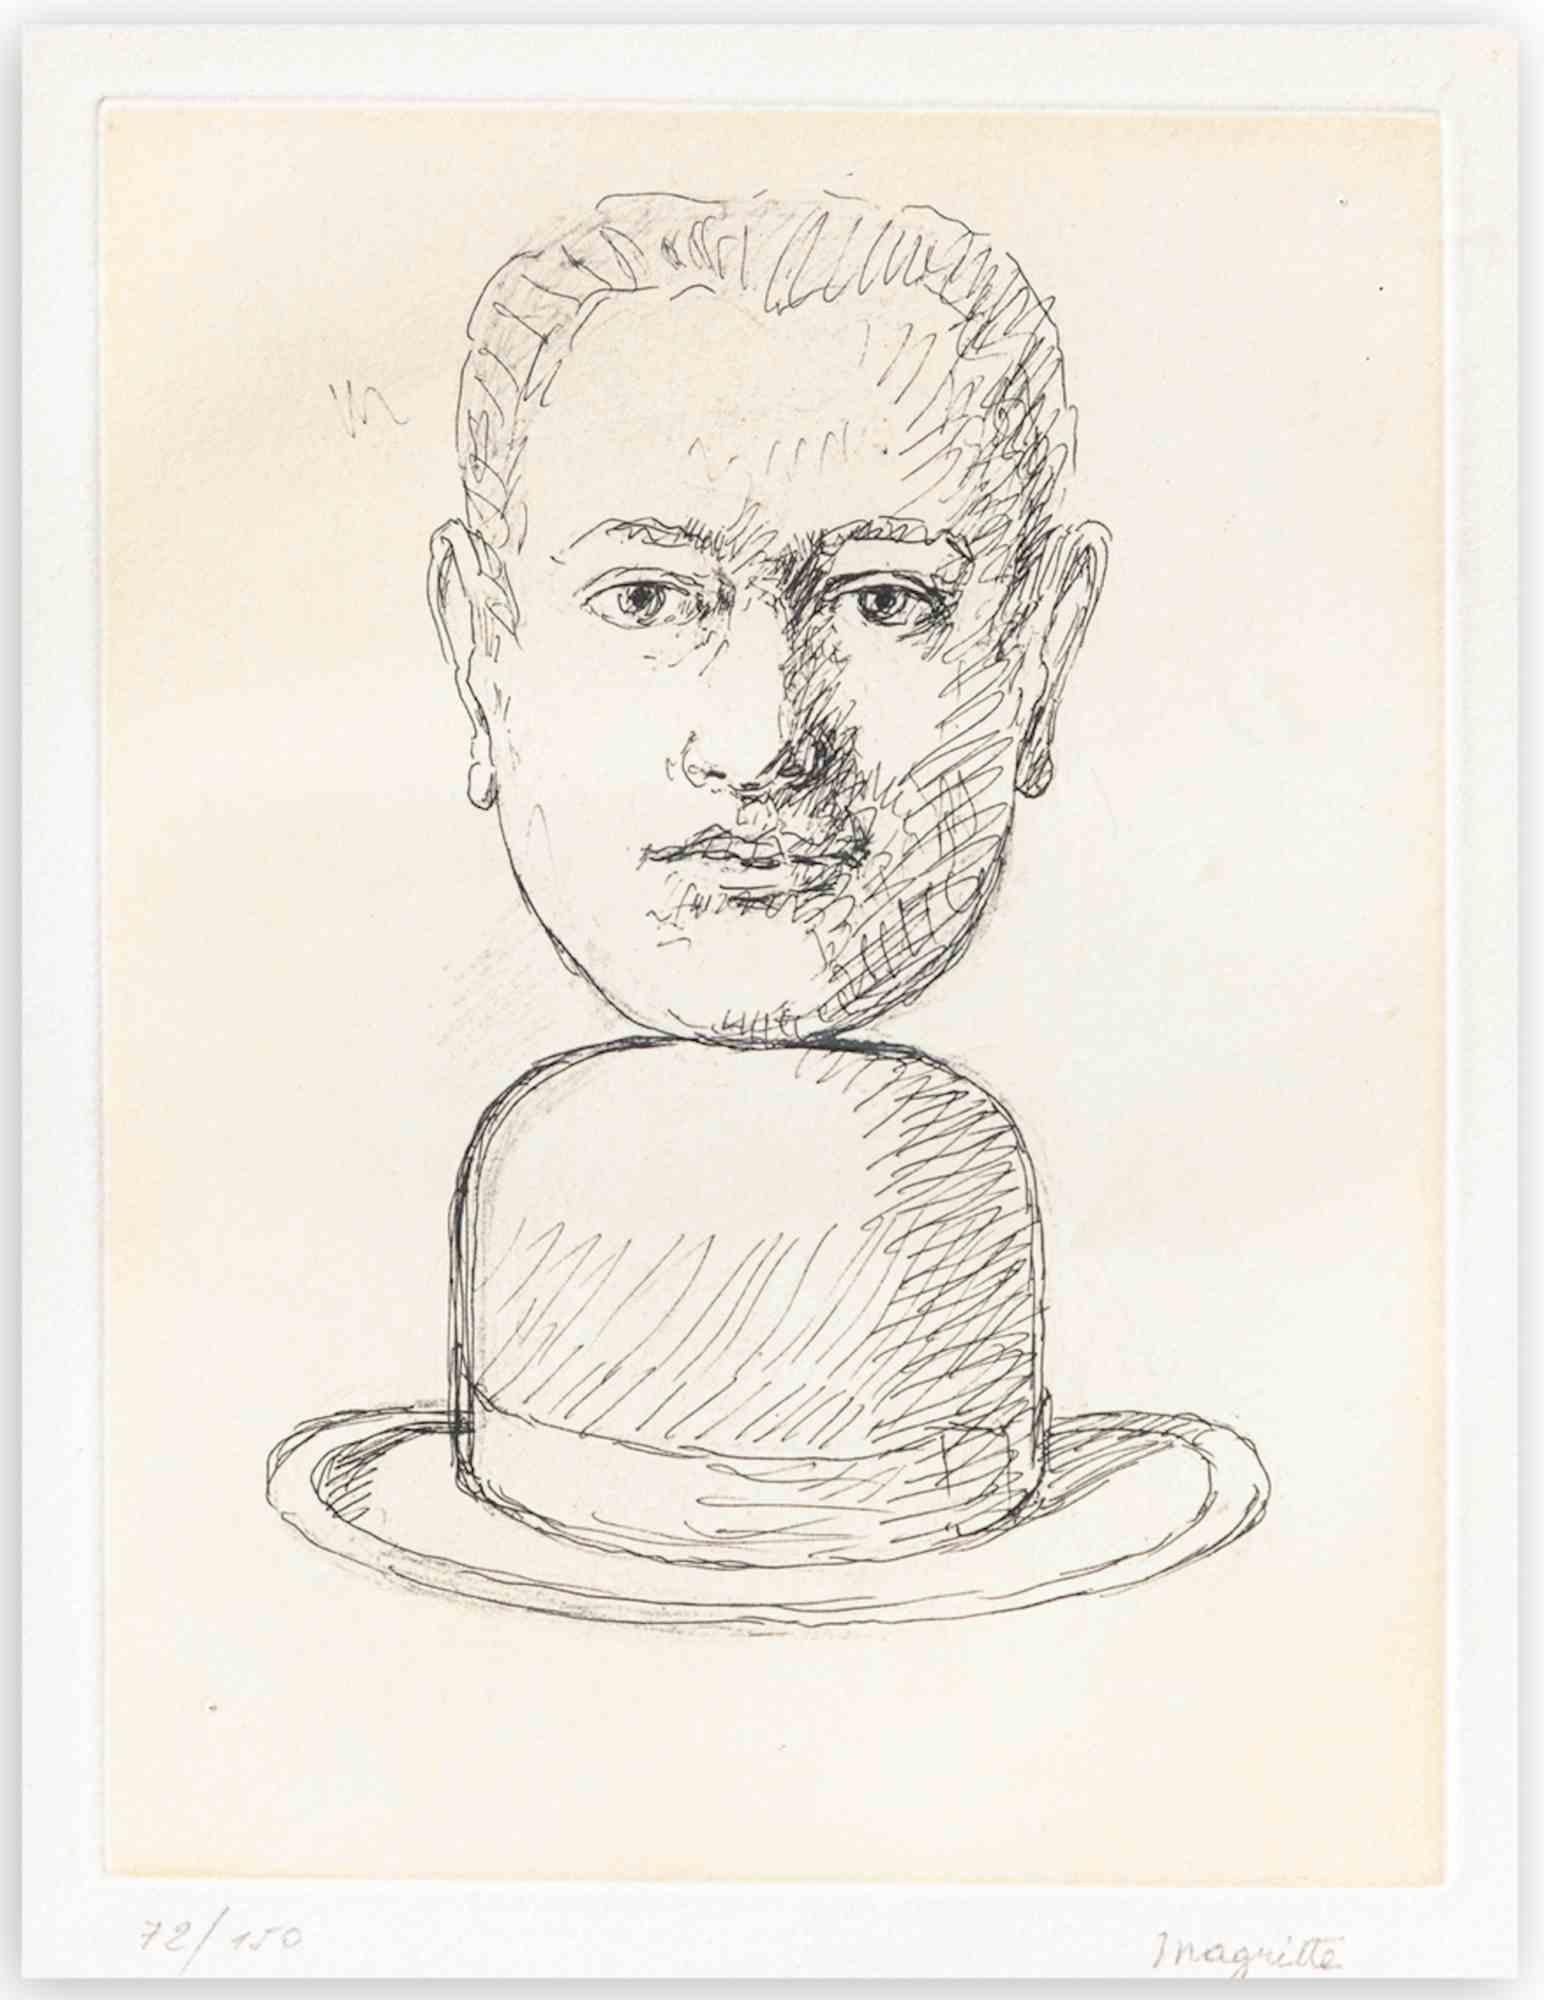 Untitled is an artwork realized by René Magritte, in 1968.

Etching in black and white. 

Illustration for the volume "Le Lien de Paille", by Louis Scutenaire.

Stamp Signed lower right. Numbered lower left. Edition of 72/150.

Printed by Atelier